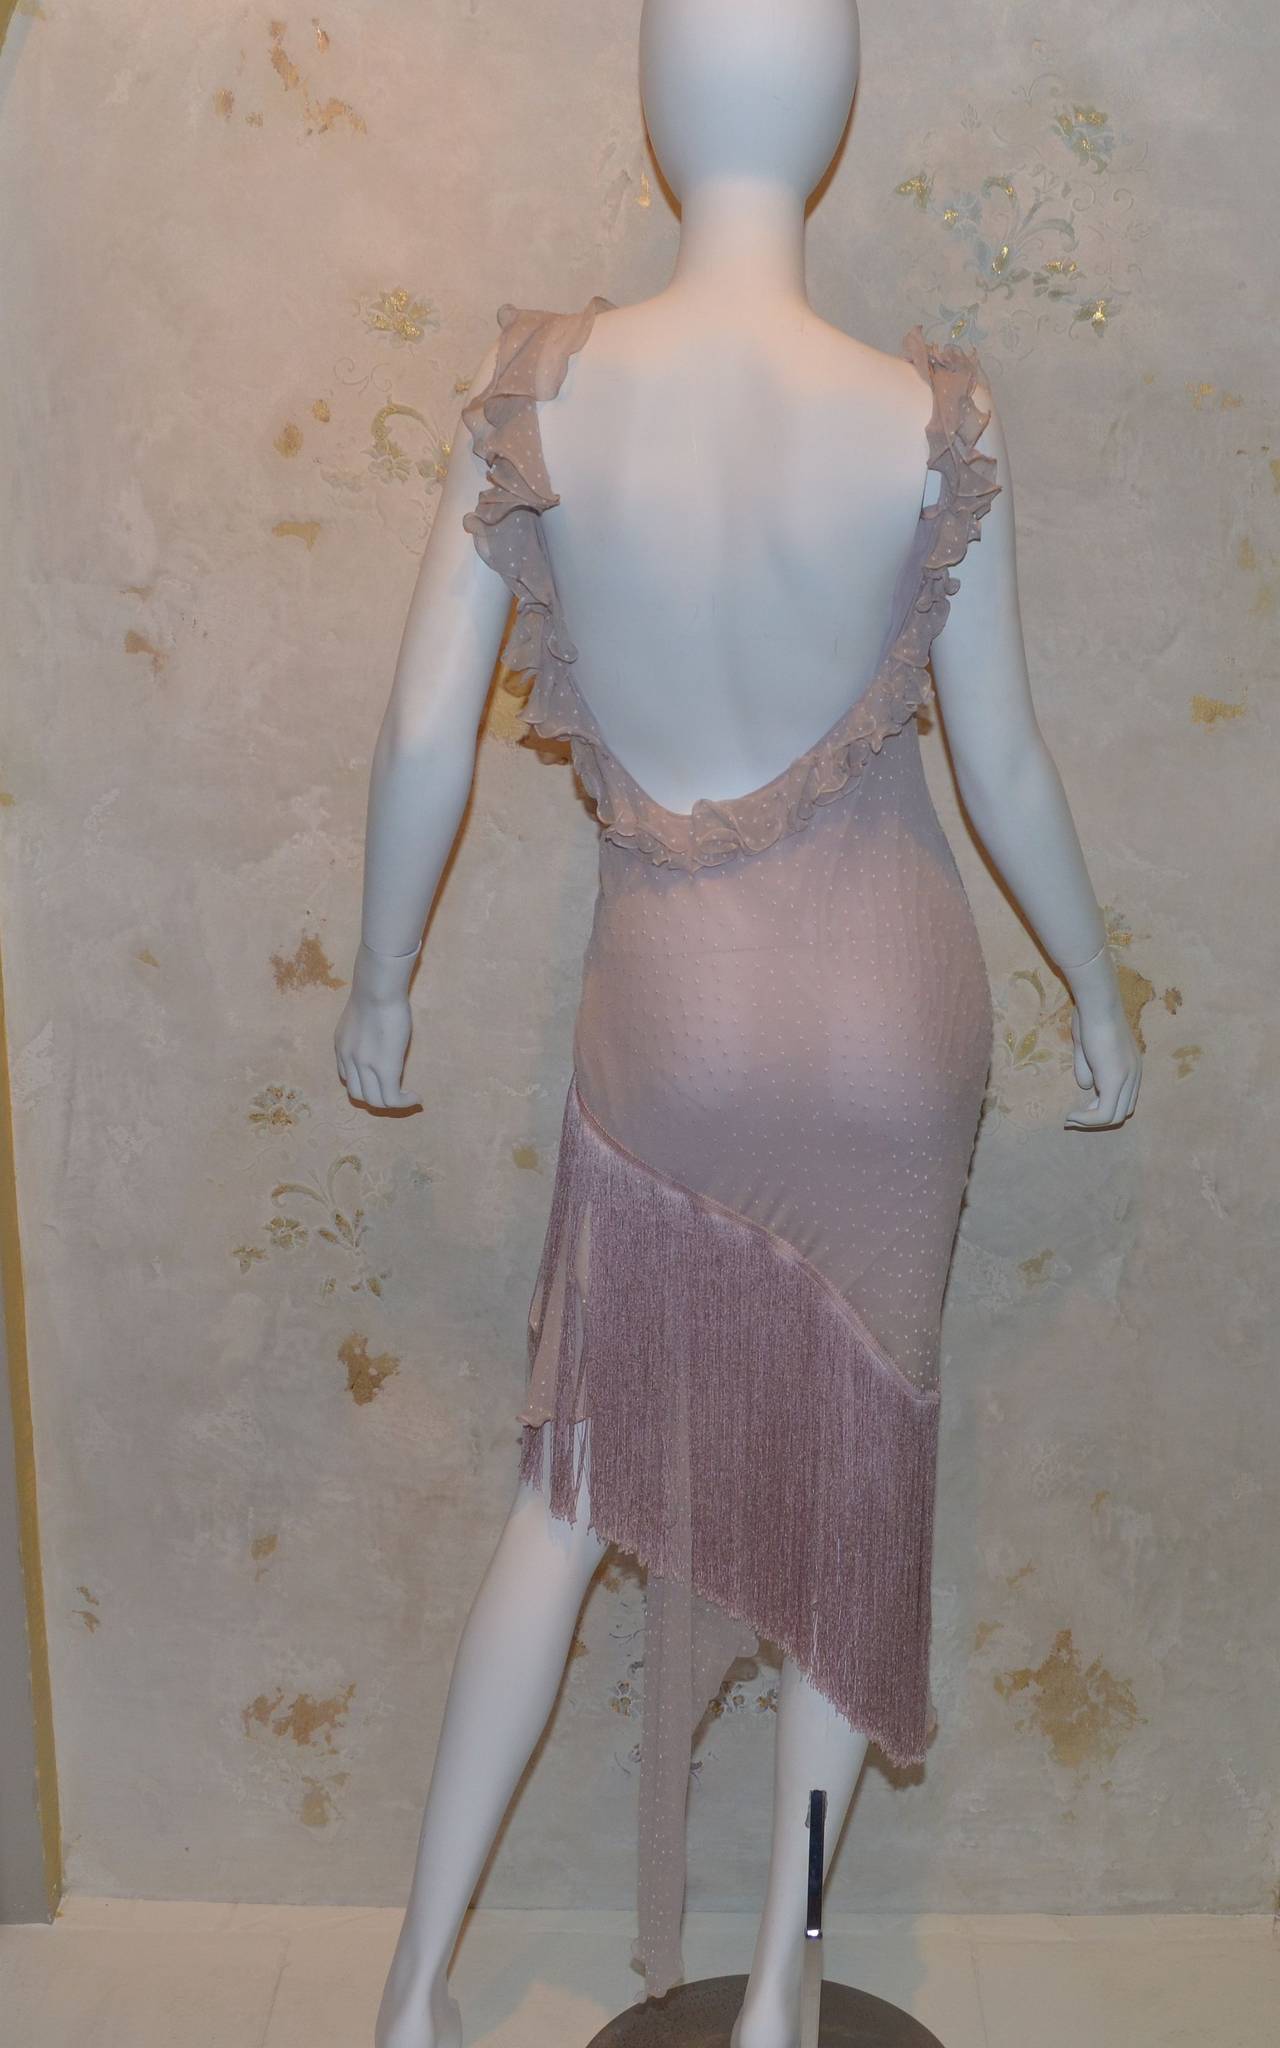 John Galliano for Christian Dior bias cut asymmetrical pastel purple/pink dotted swiss silk dress with ruffled detail along the front, swiss dot fabric, assymetric hem with a long fringe and subtle lace trim over one thigh. Dress is fully lined and